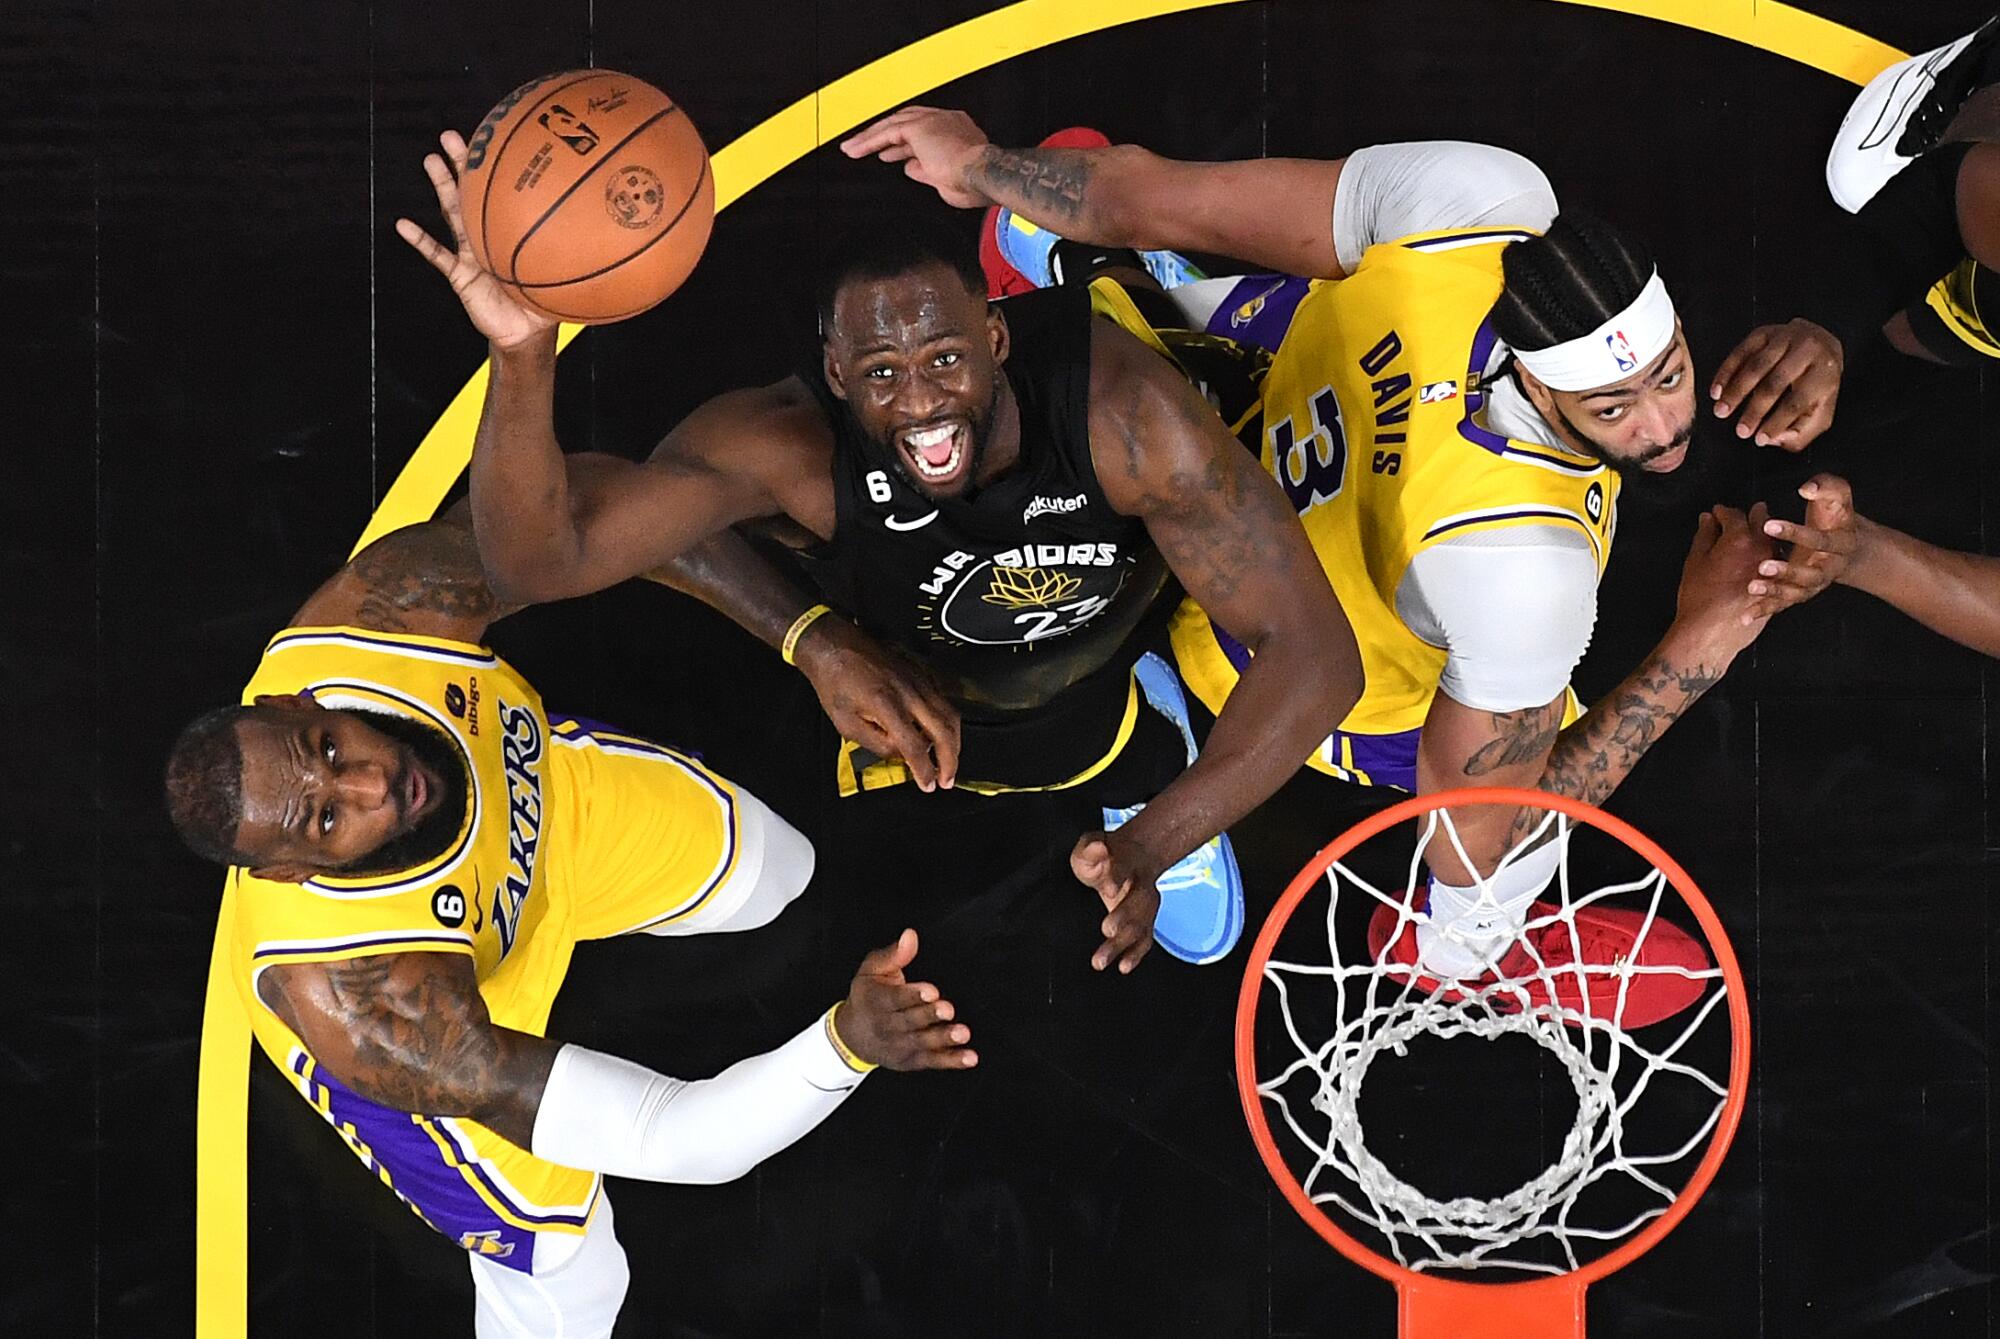 Lakers LeBron James, left, and Antony Davis battle for a rebound against Warriors Draymond Green in the first half.